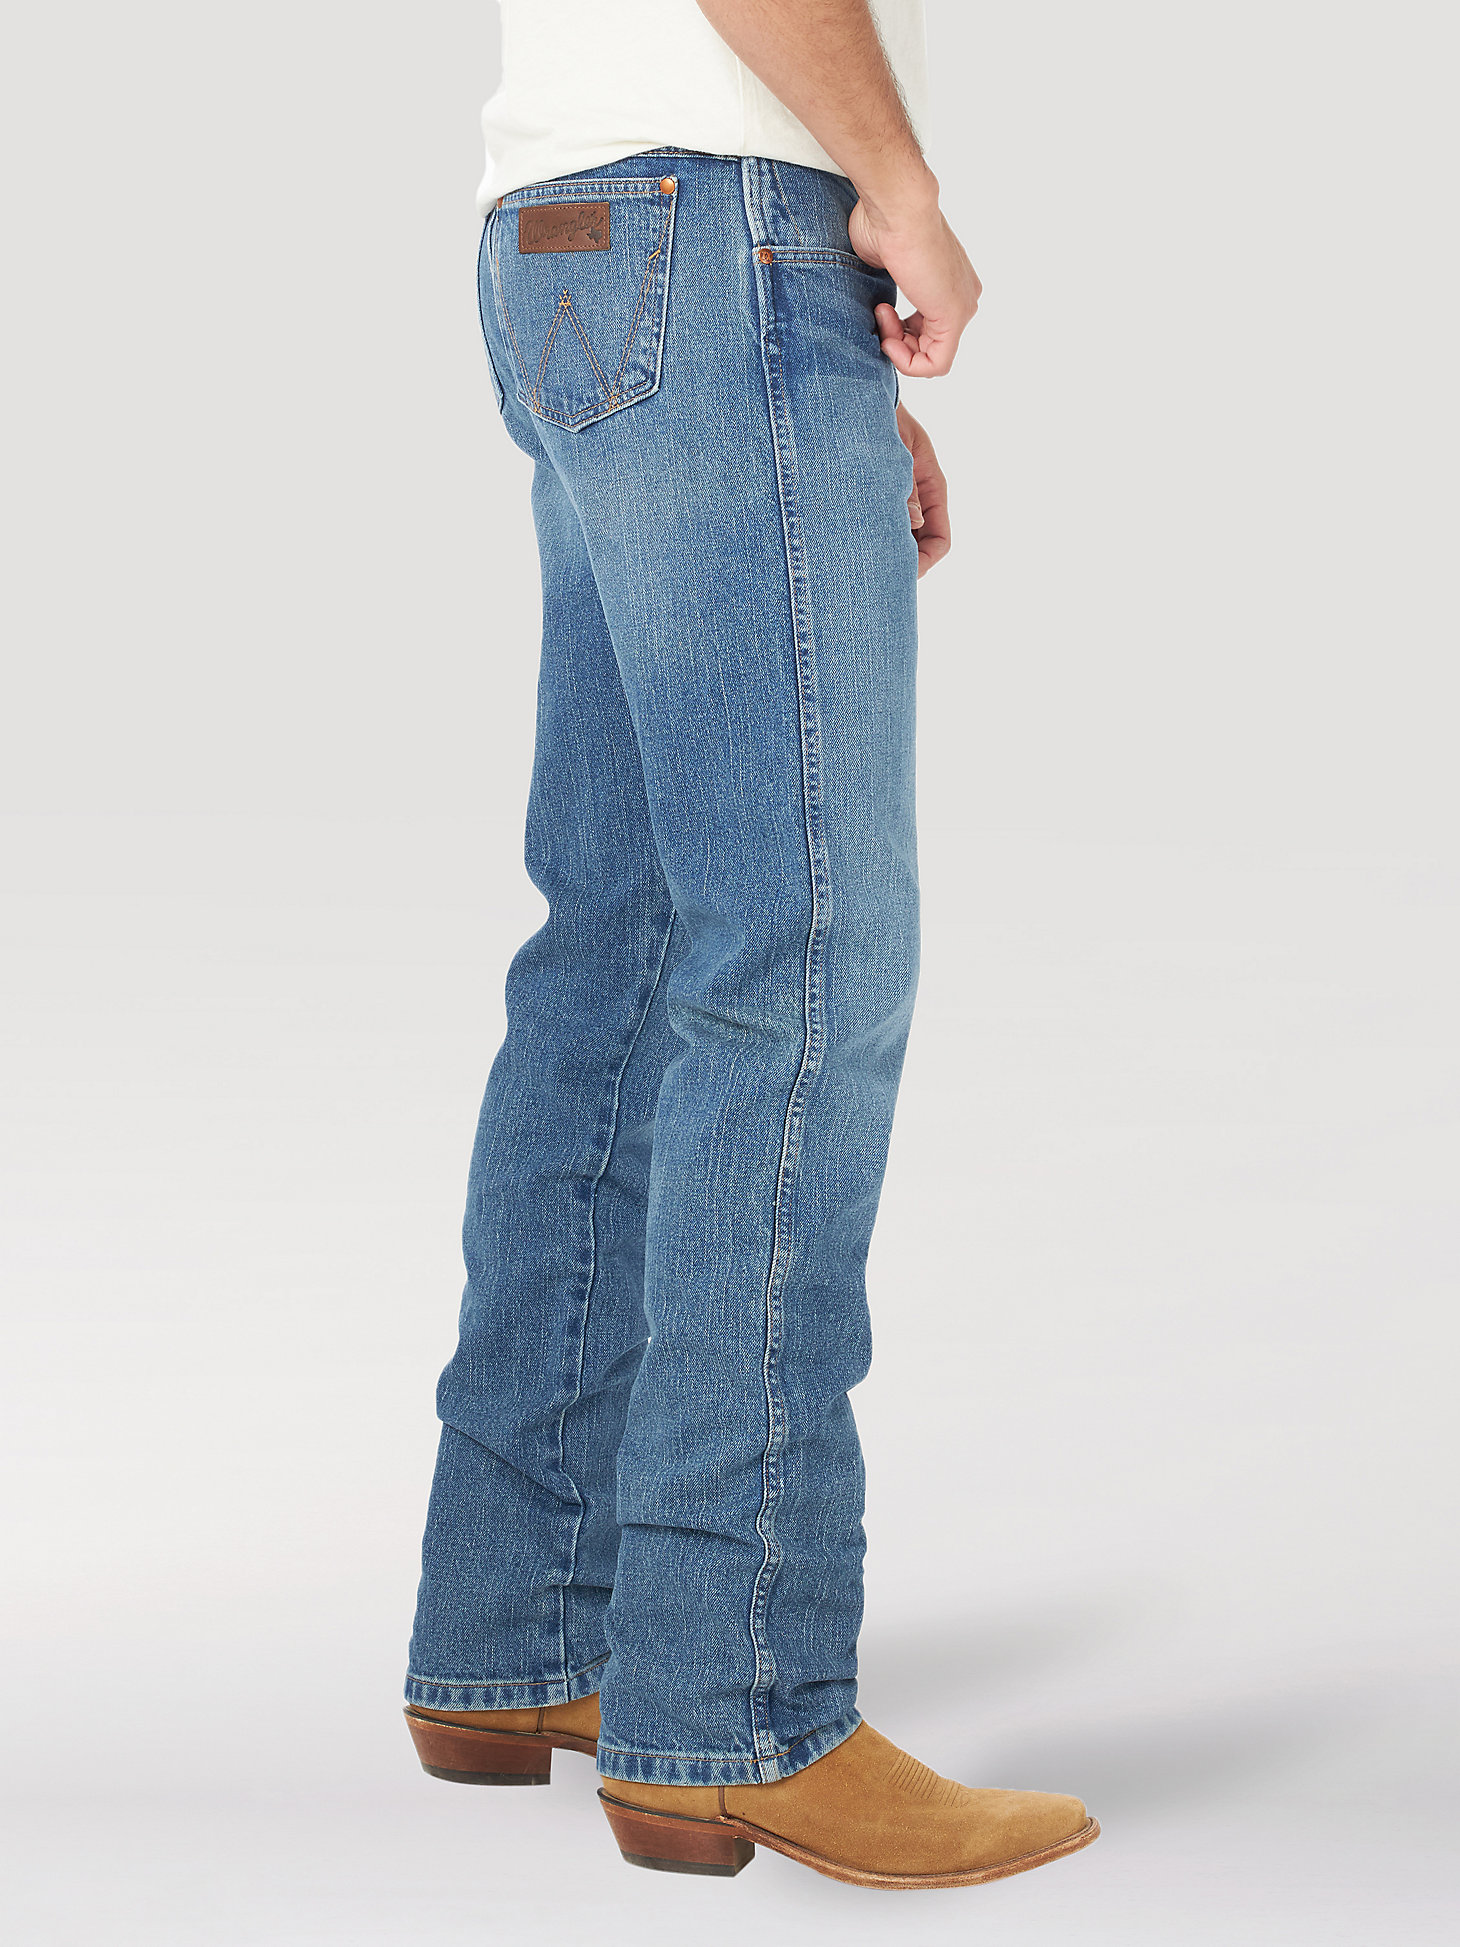 Men's Wrangler Rooted Collection™ Slim Fit Straight Leg Jean with Texas Cotton in Blue alternative view 2